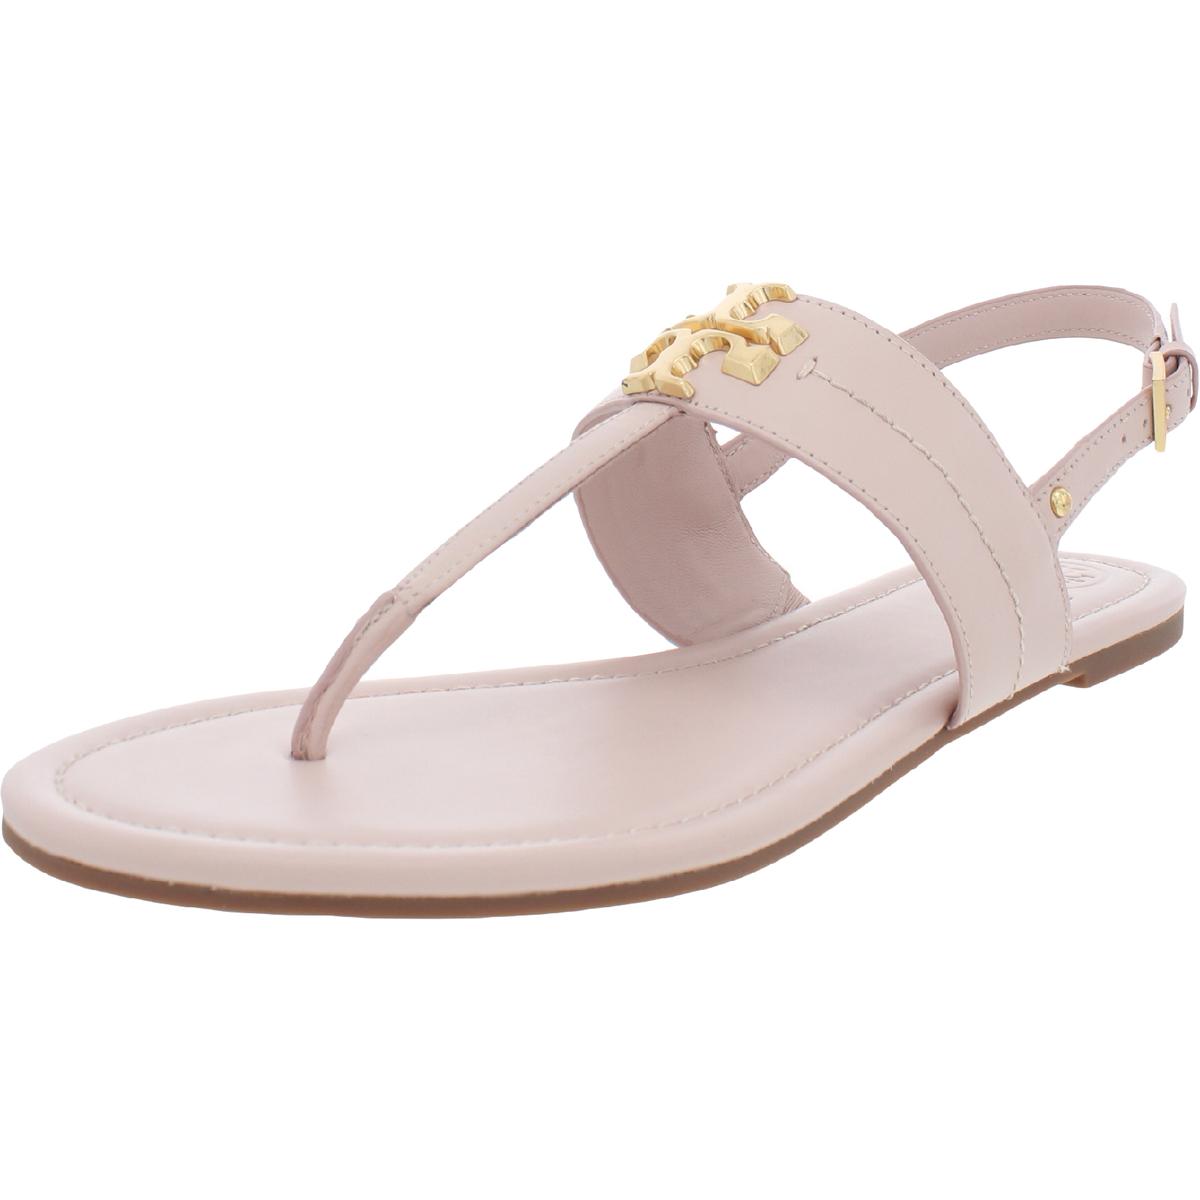 Tory Burch Everly Womens Leather Thong Flat Sandals